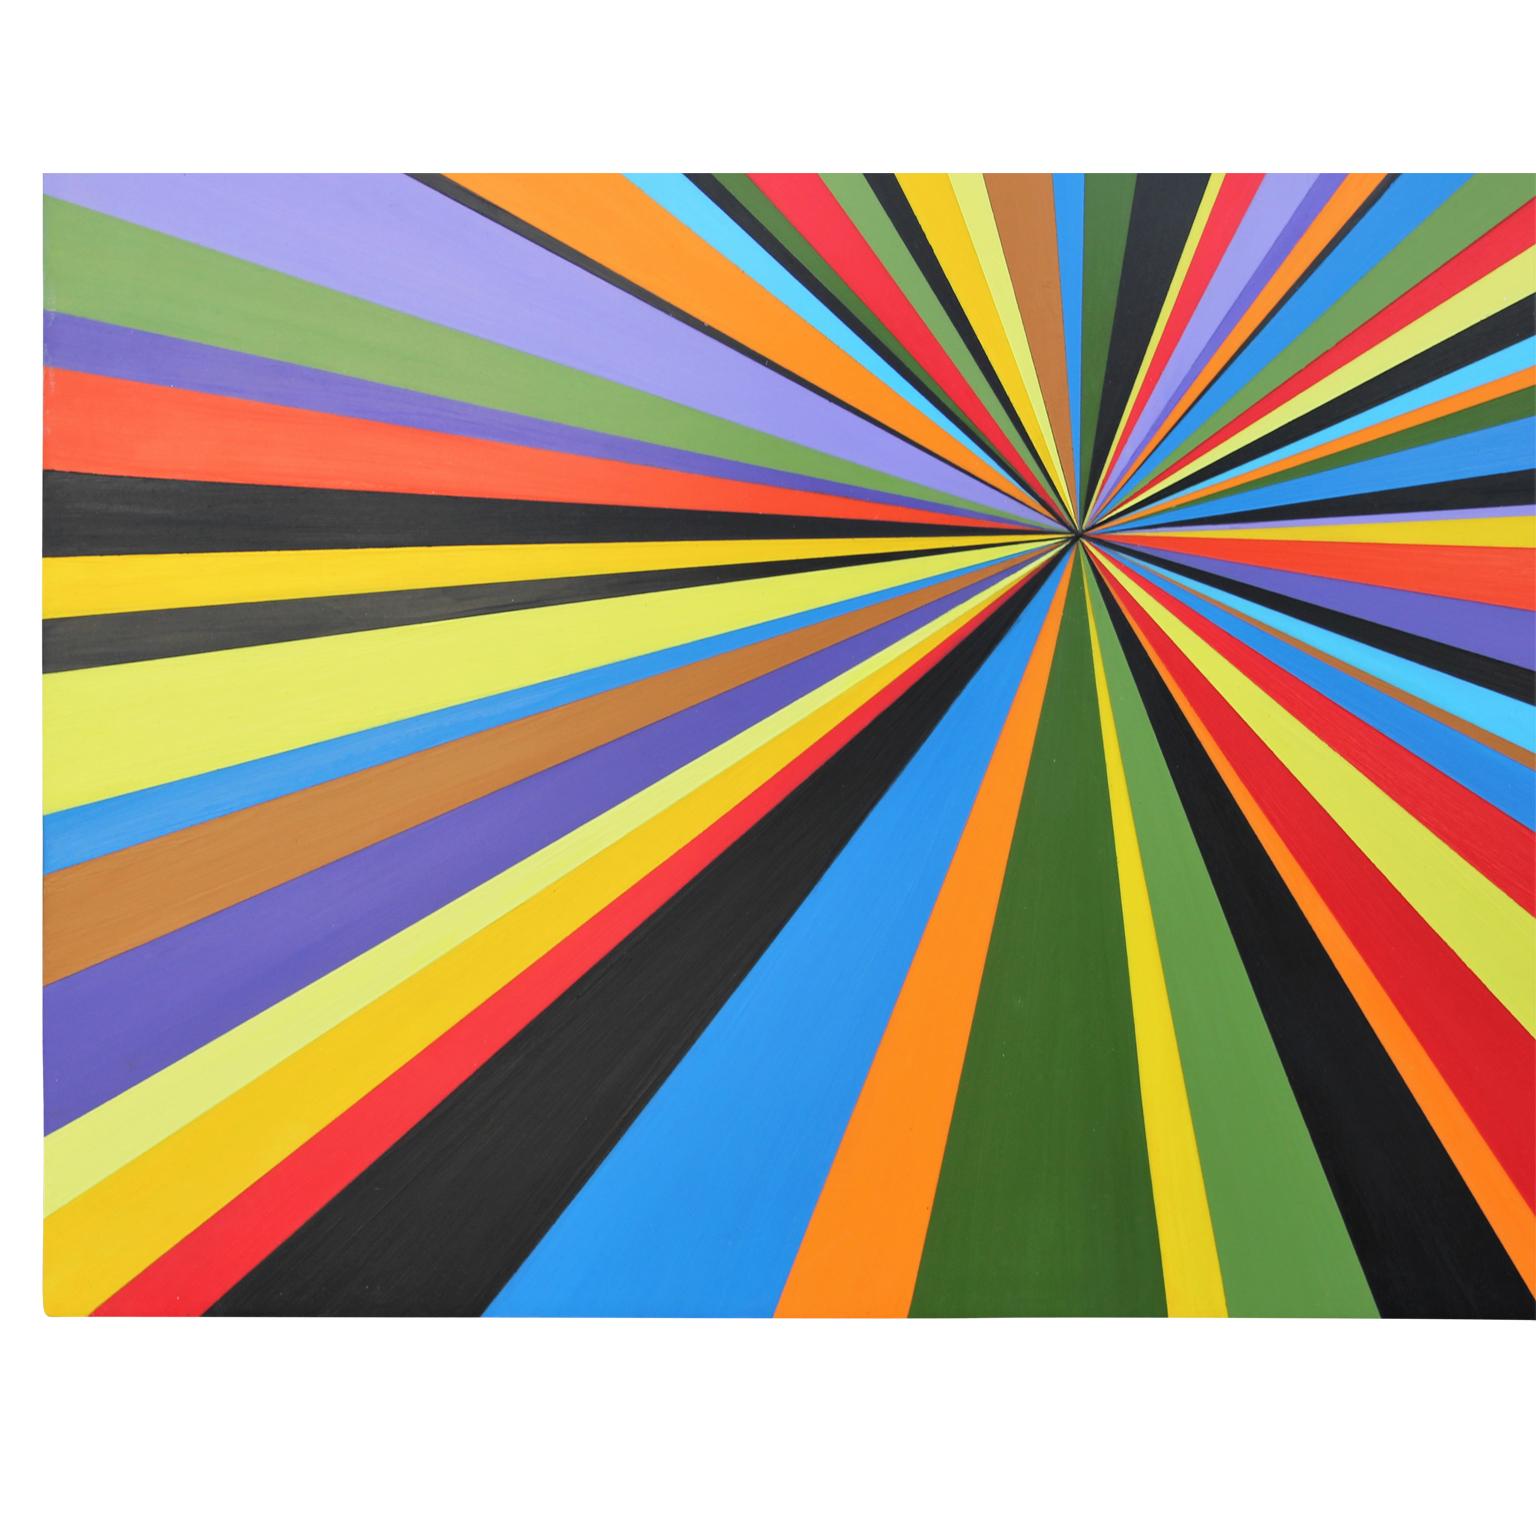 “Focal Point (Stare)” Colorful Contemporary Geometric Op Art Abstract Painting 1